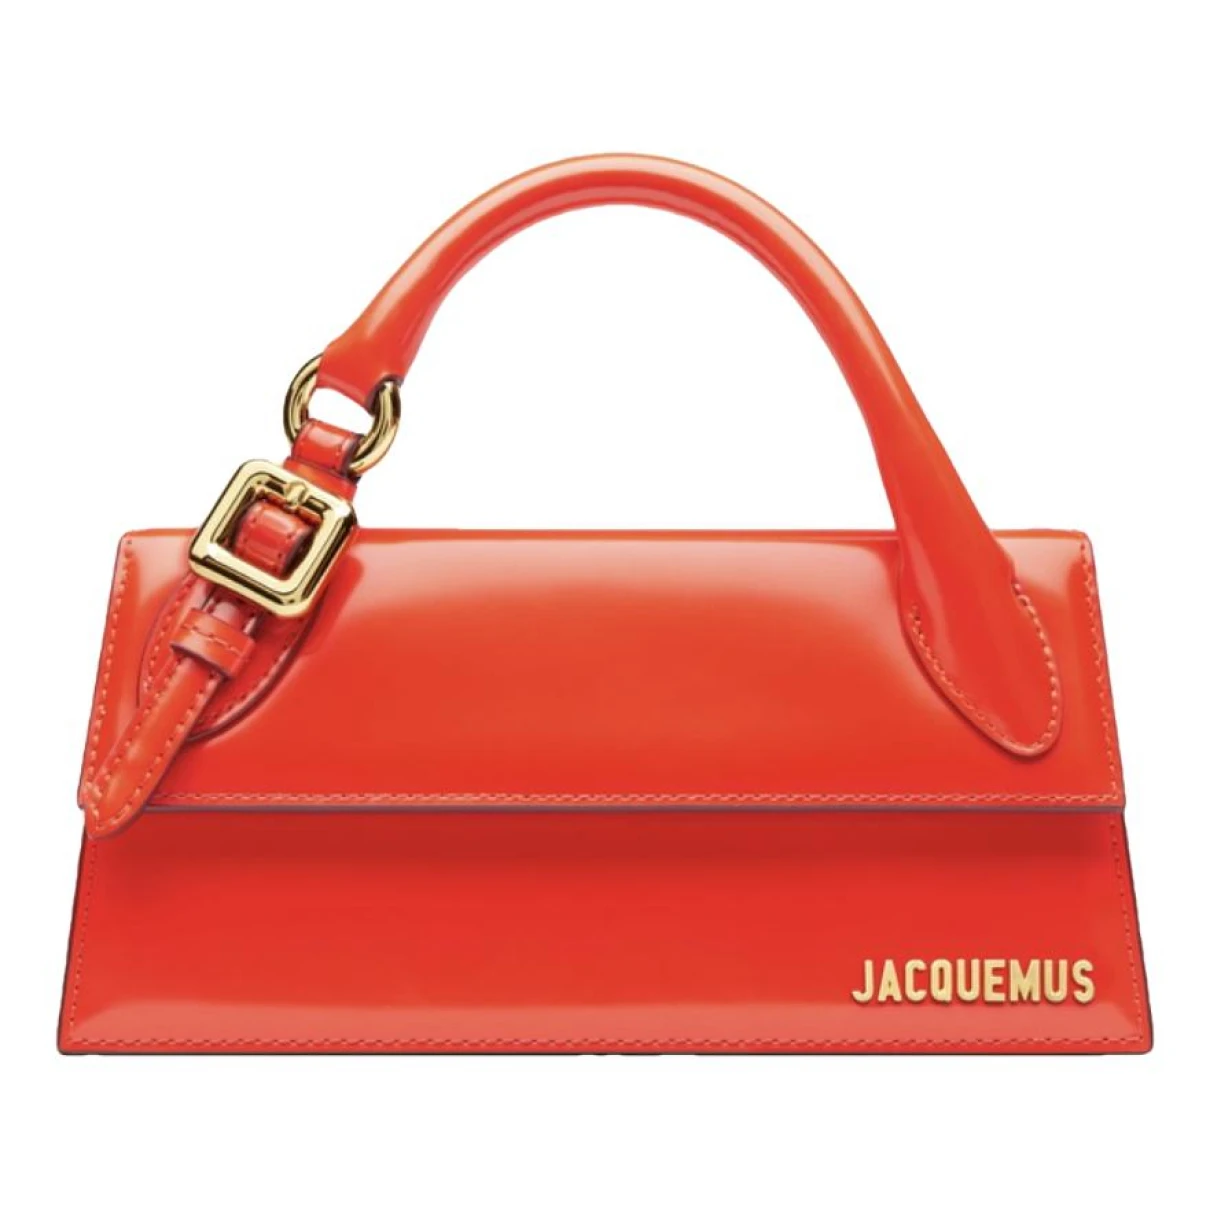 Pre-owned Jacquemus Chiquito Long Pony-style Calfskin Handbag In Orange